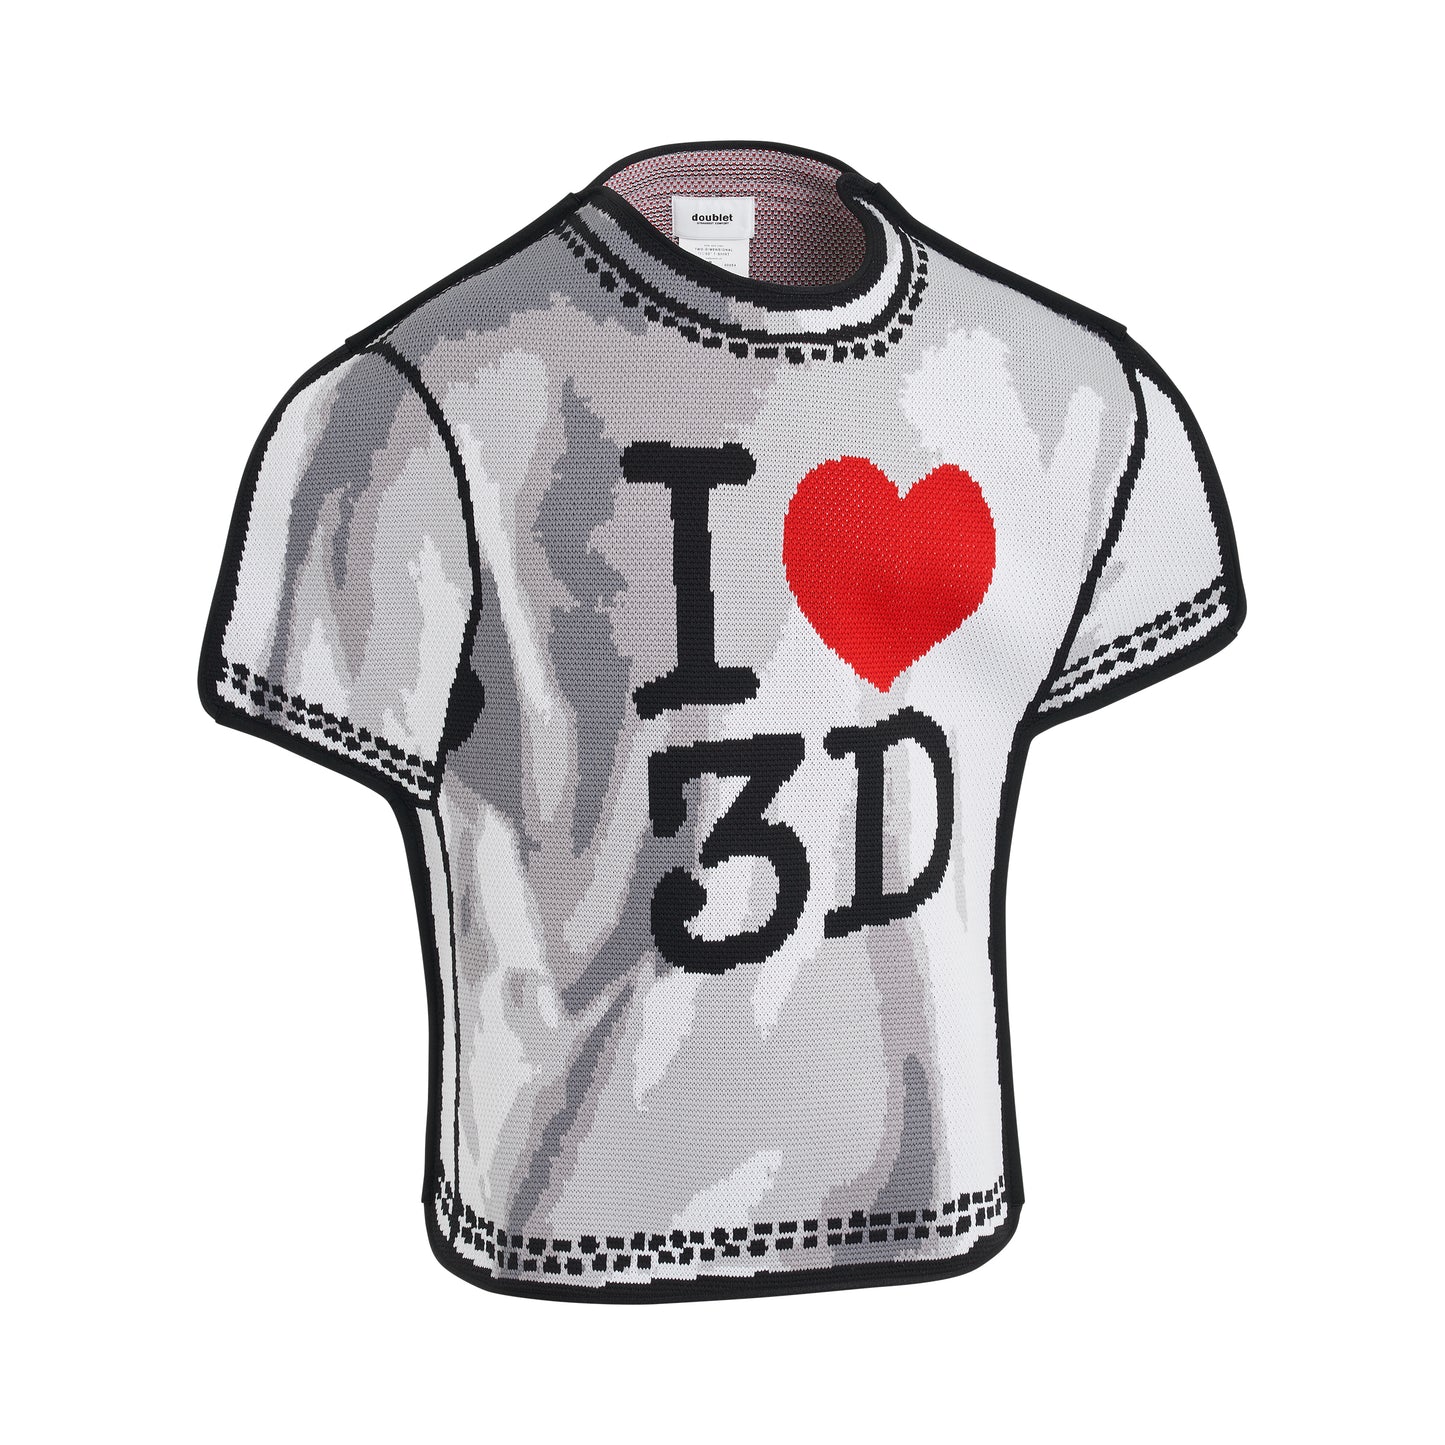 Two-Dimensional "1♡3D" T-Shirt in White